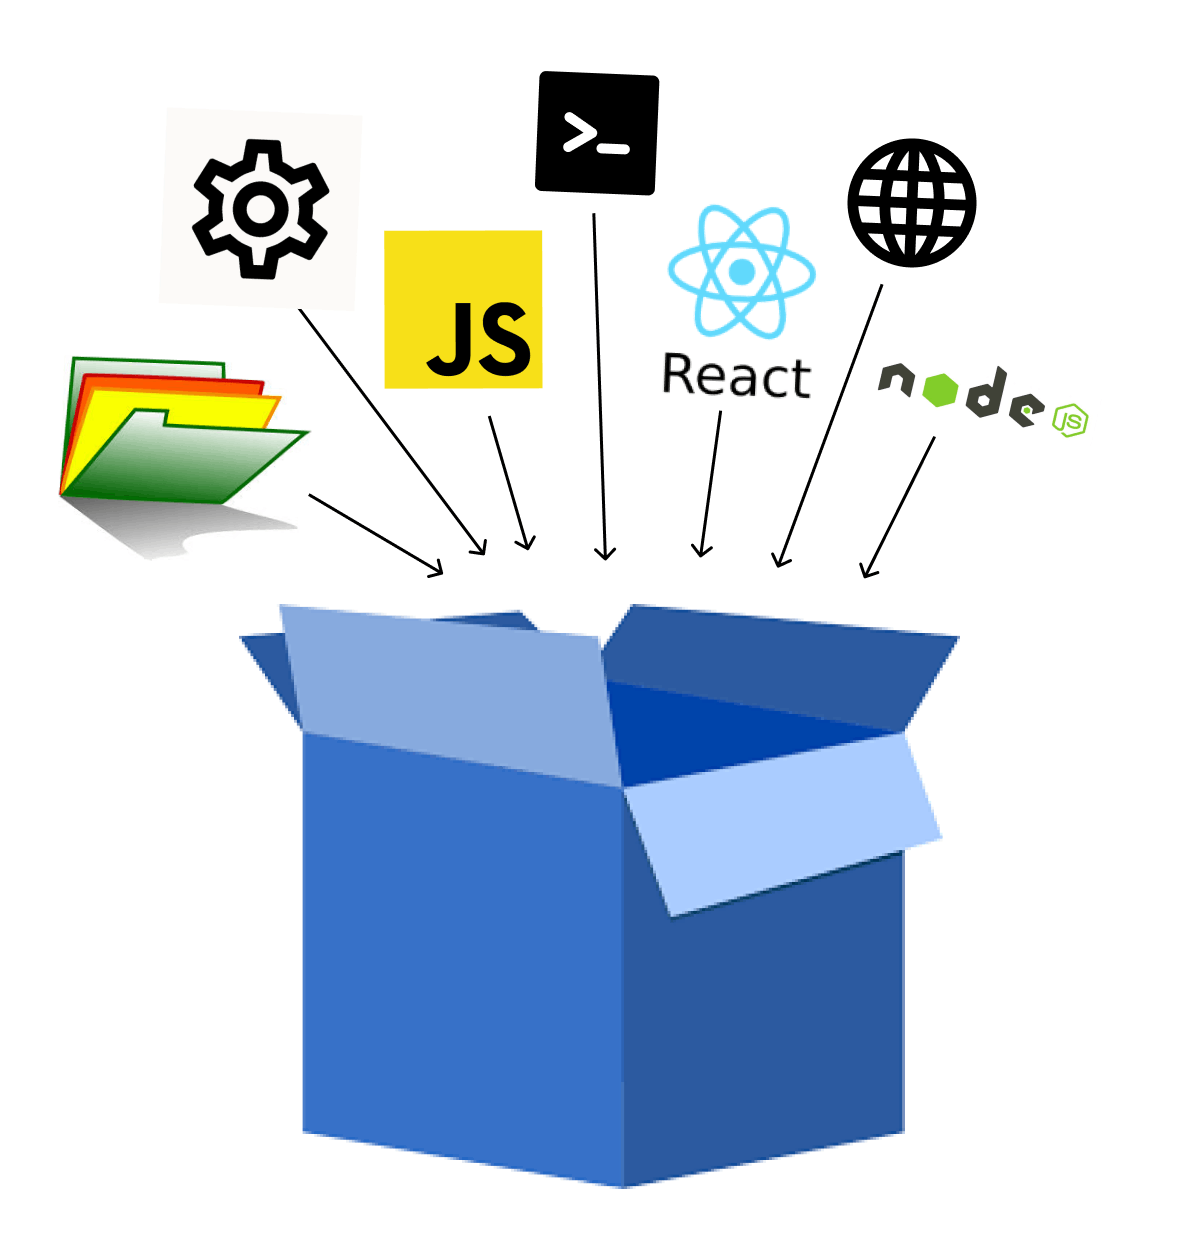 A box with Files, NodeJS, JavaScript, React, settings, ports, and commands above it with arrows pointing towards the box